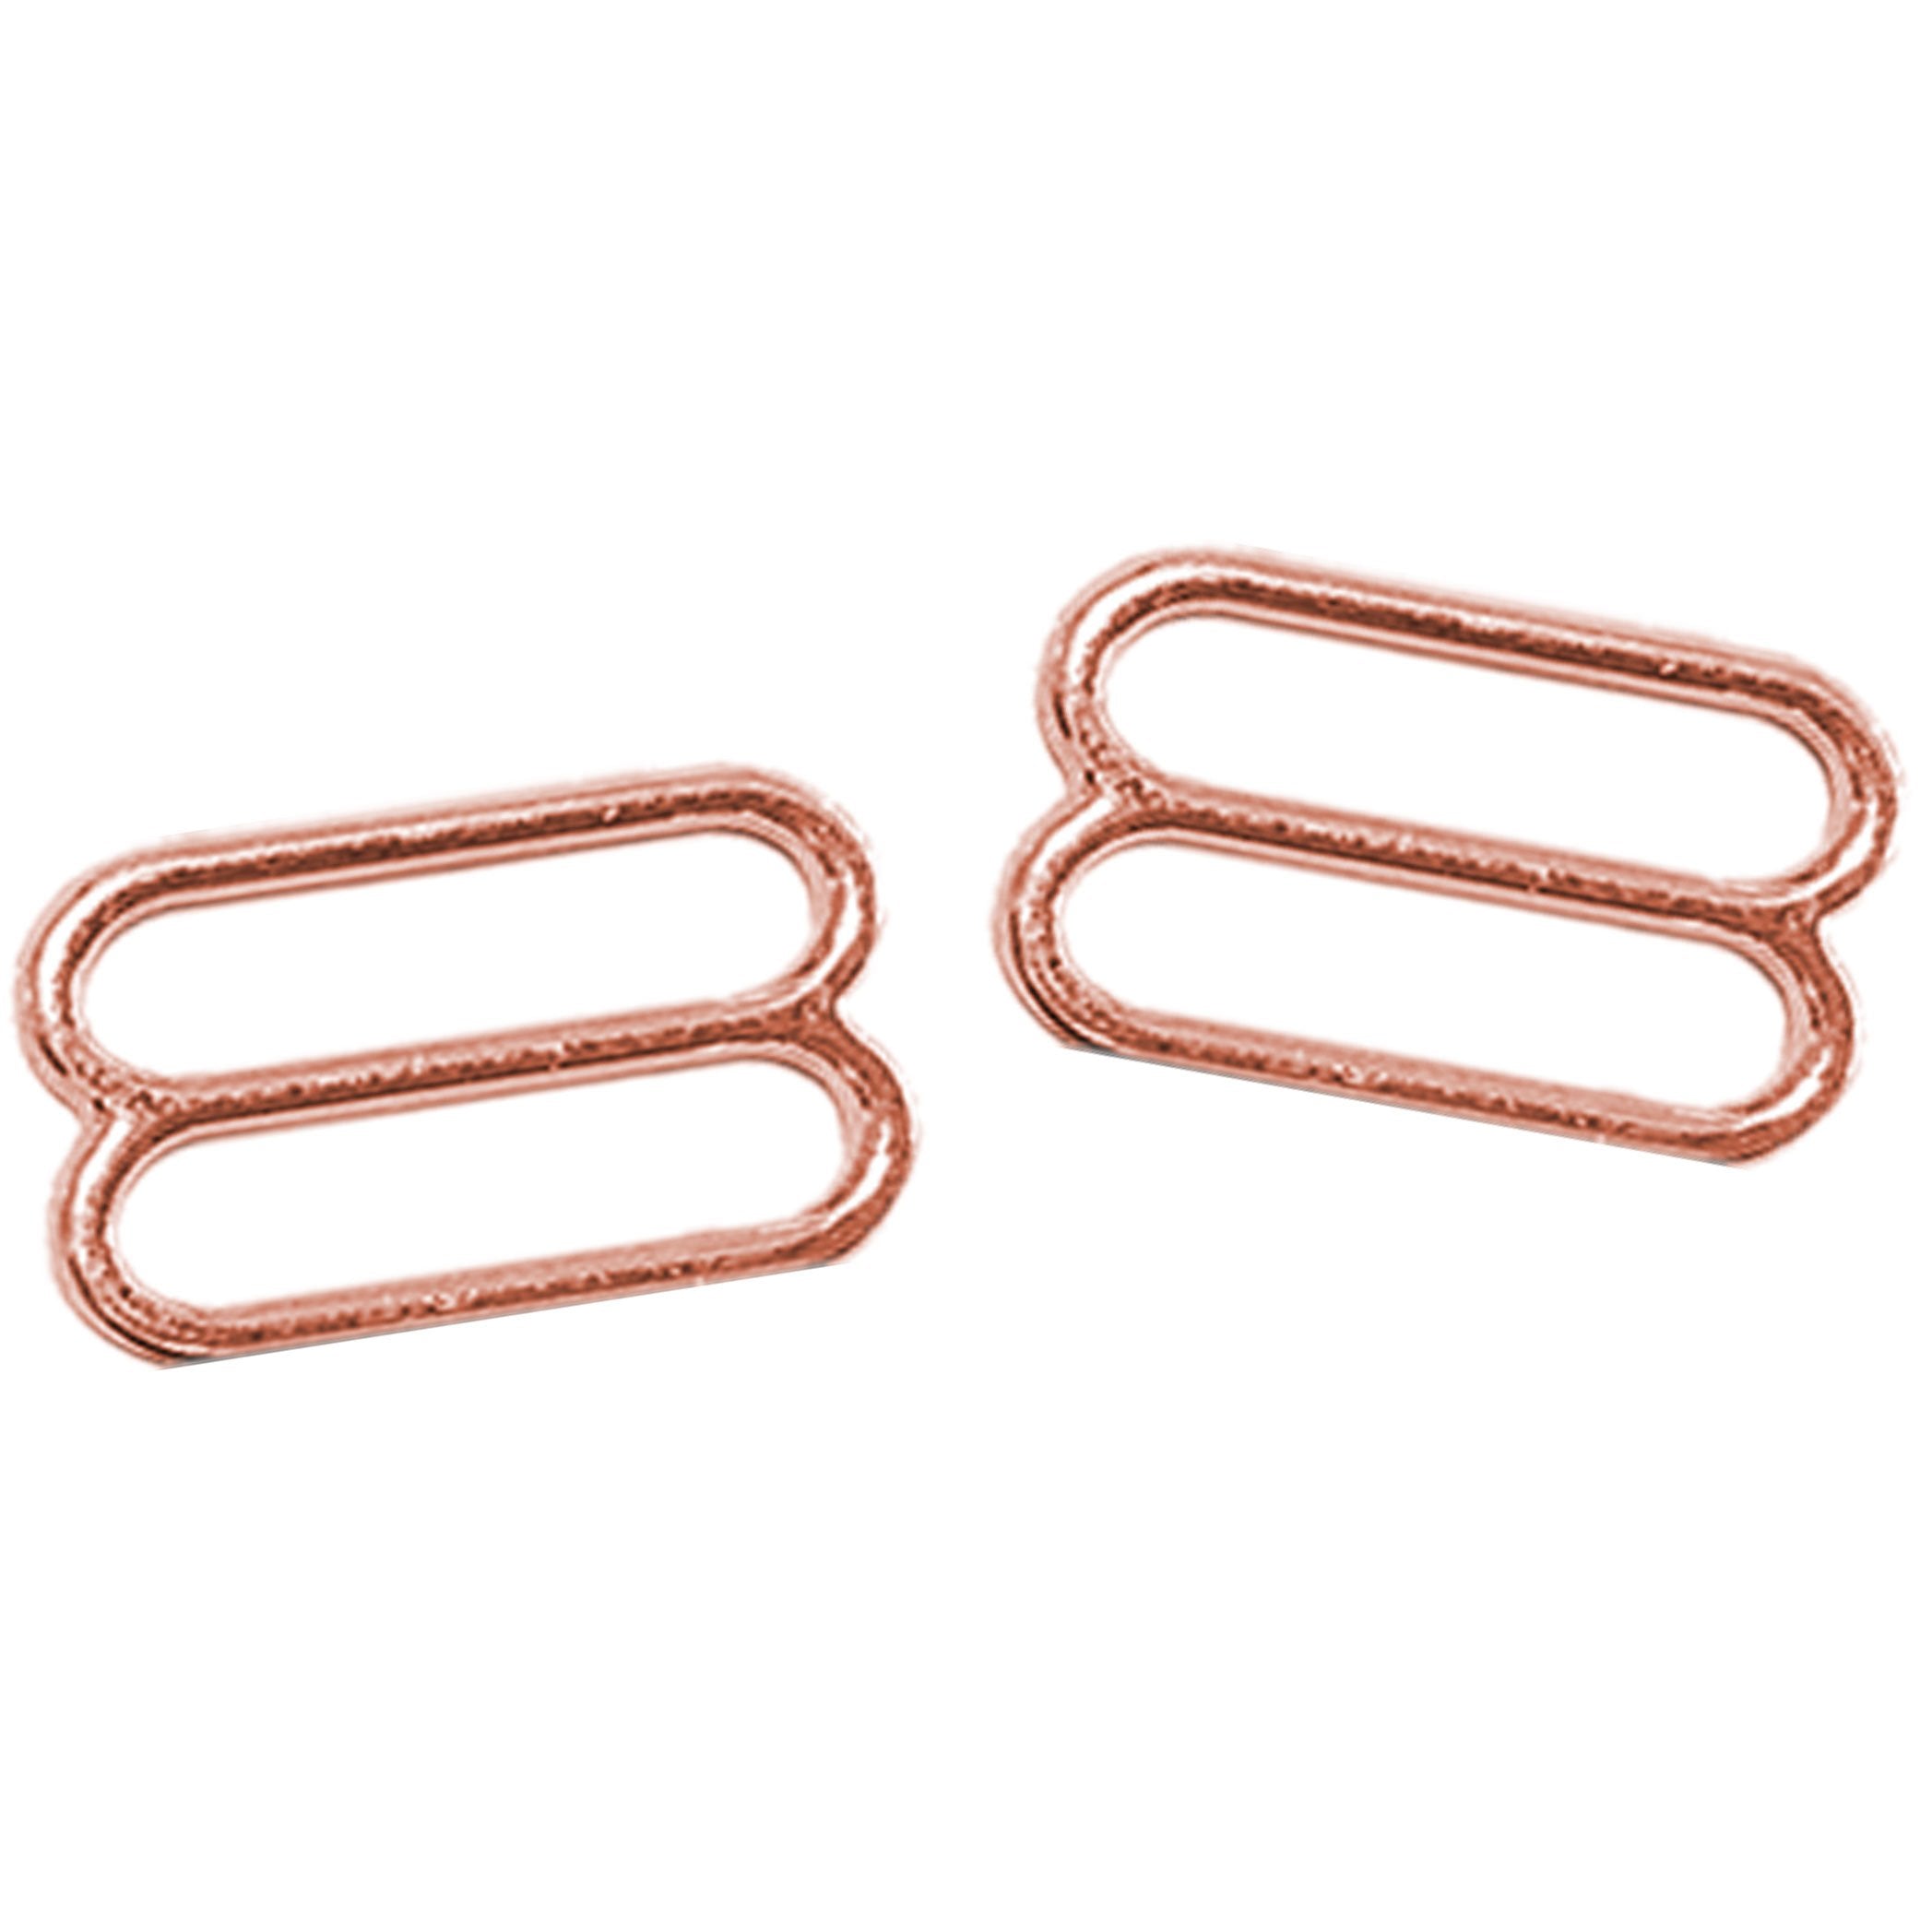 Set of 2 Rings OR 2 Sliders in Rose Gold– 1/4" (6mm), 3/8" (10mm), 1/2" (12mm), 5/8" (15mm), 3/4" (20mm)-Stitch Love Studio